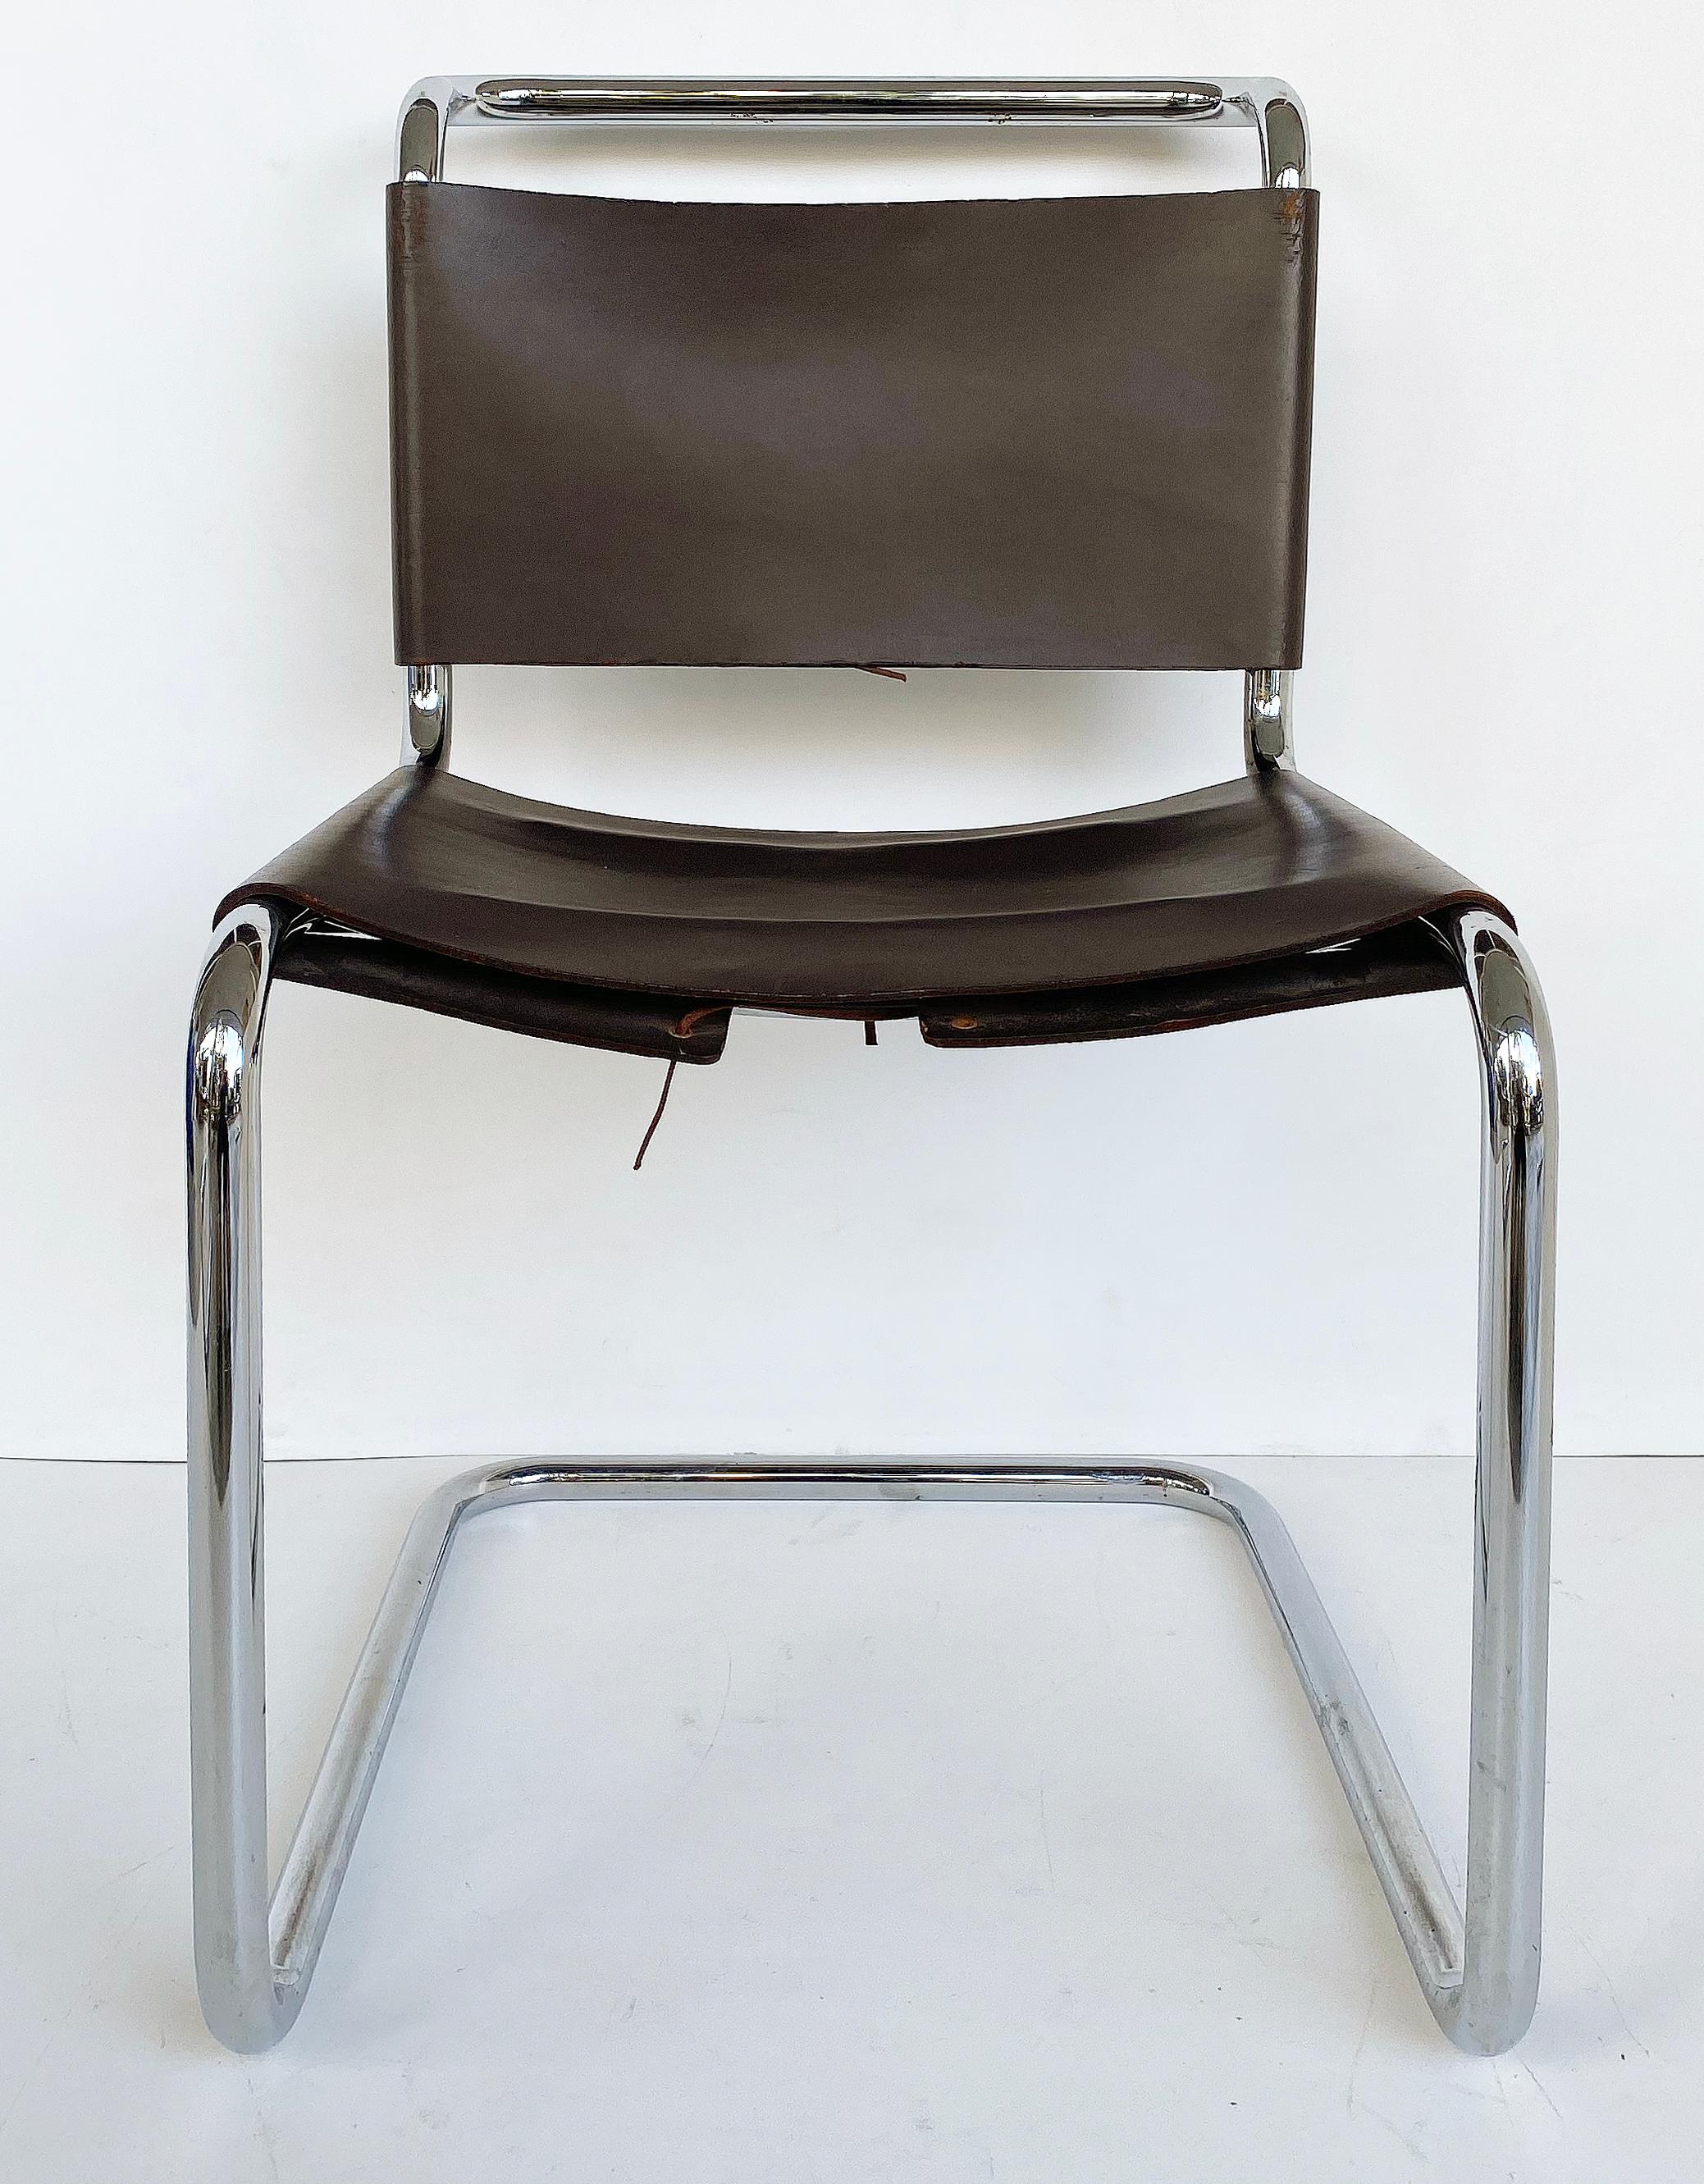 Marcel Breuer Knoll B-33 cantilever chrome dining chairs

Offered for sale is a set of eight (8) Marcel Breuer-designed tubular chrome cantilevered B-33 dining chairs upholstered with chocolate brown leather sling and corseted seats and backs.